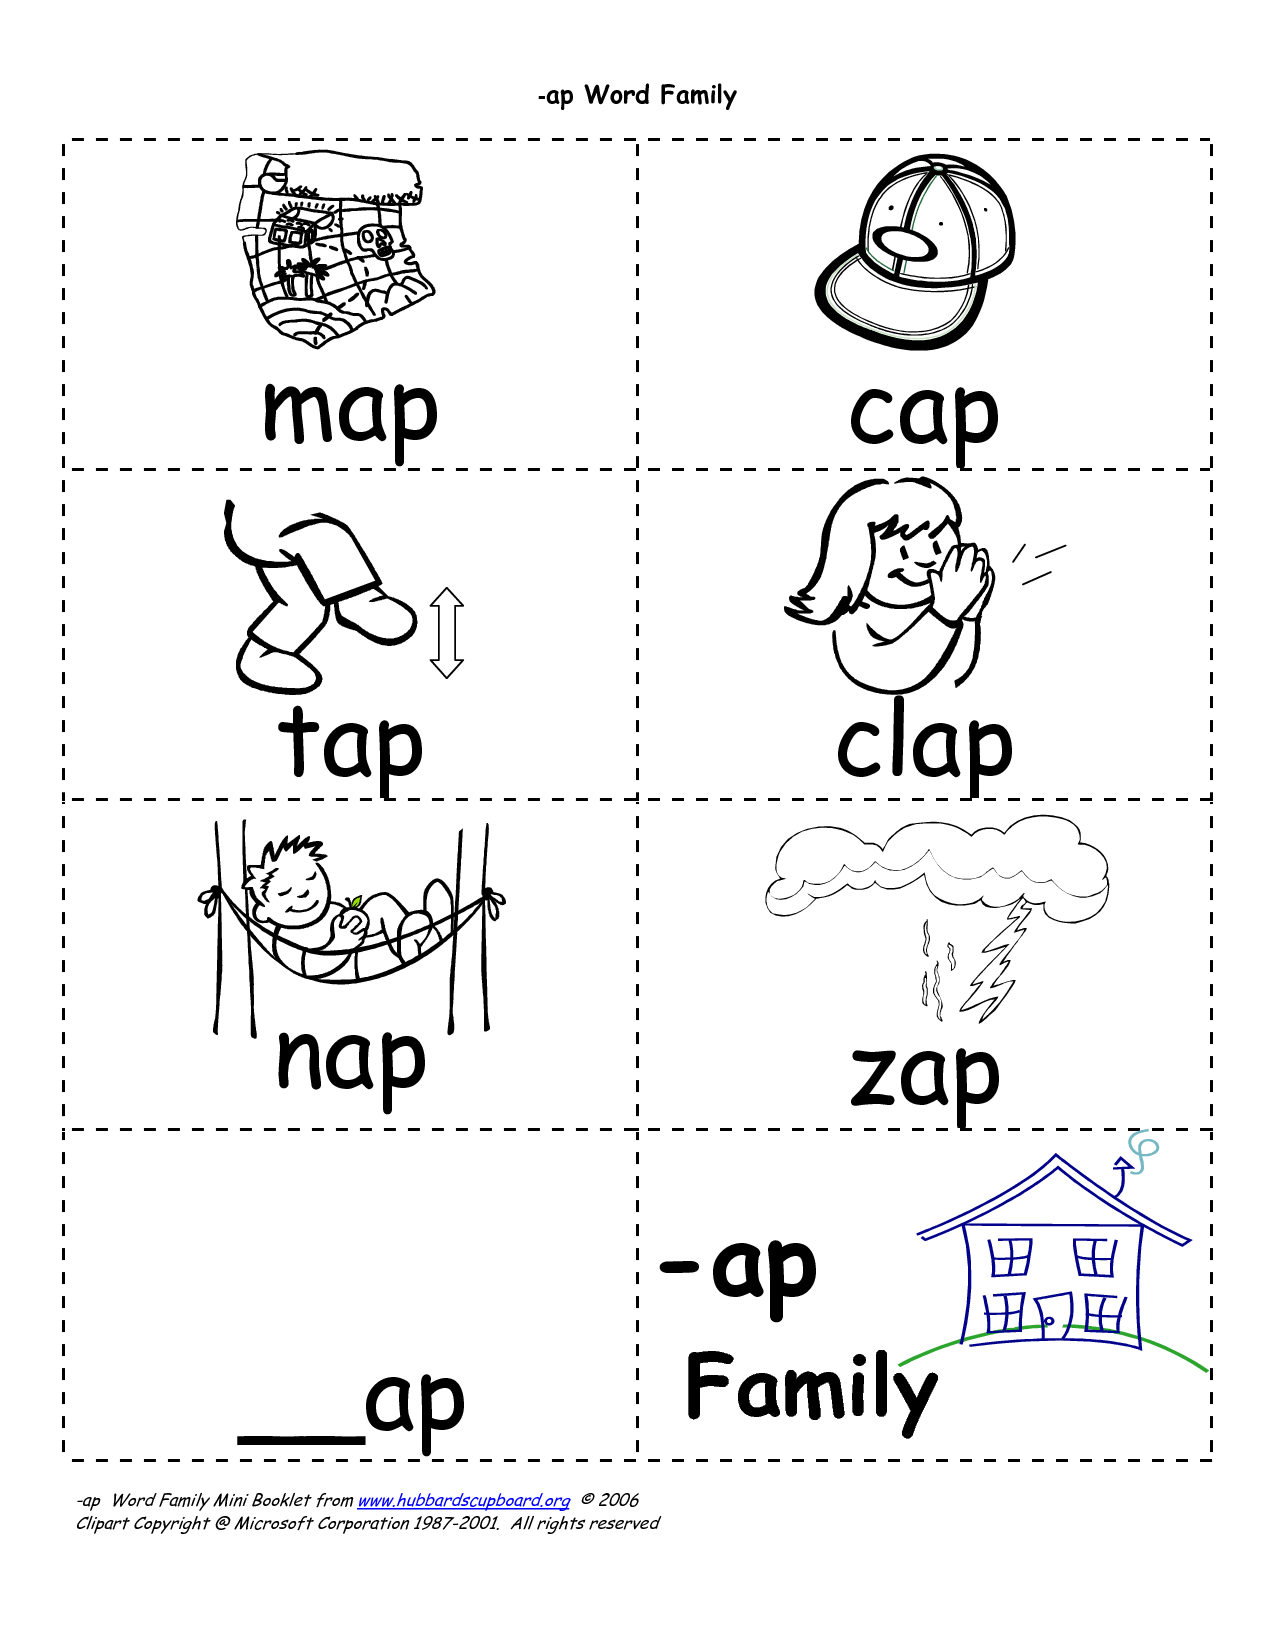 10 Best Images of The Book Family Worksheets - My Family Worksheet ...